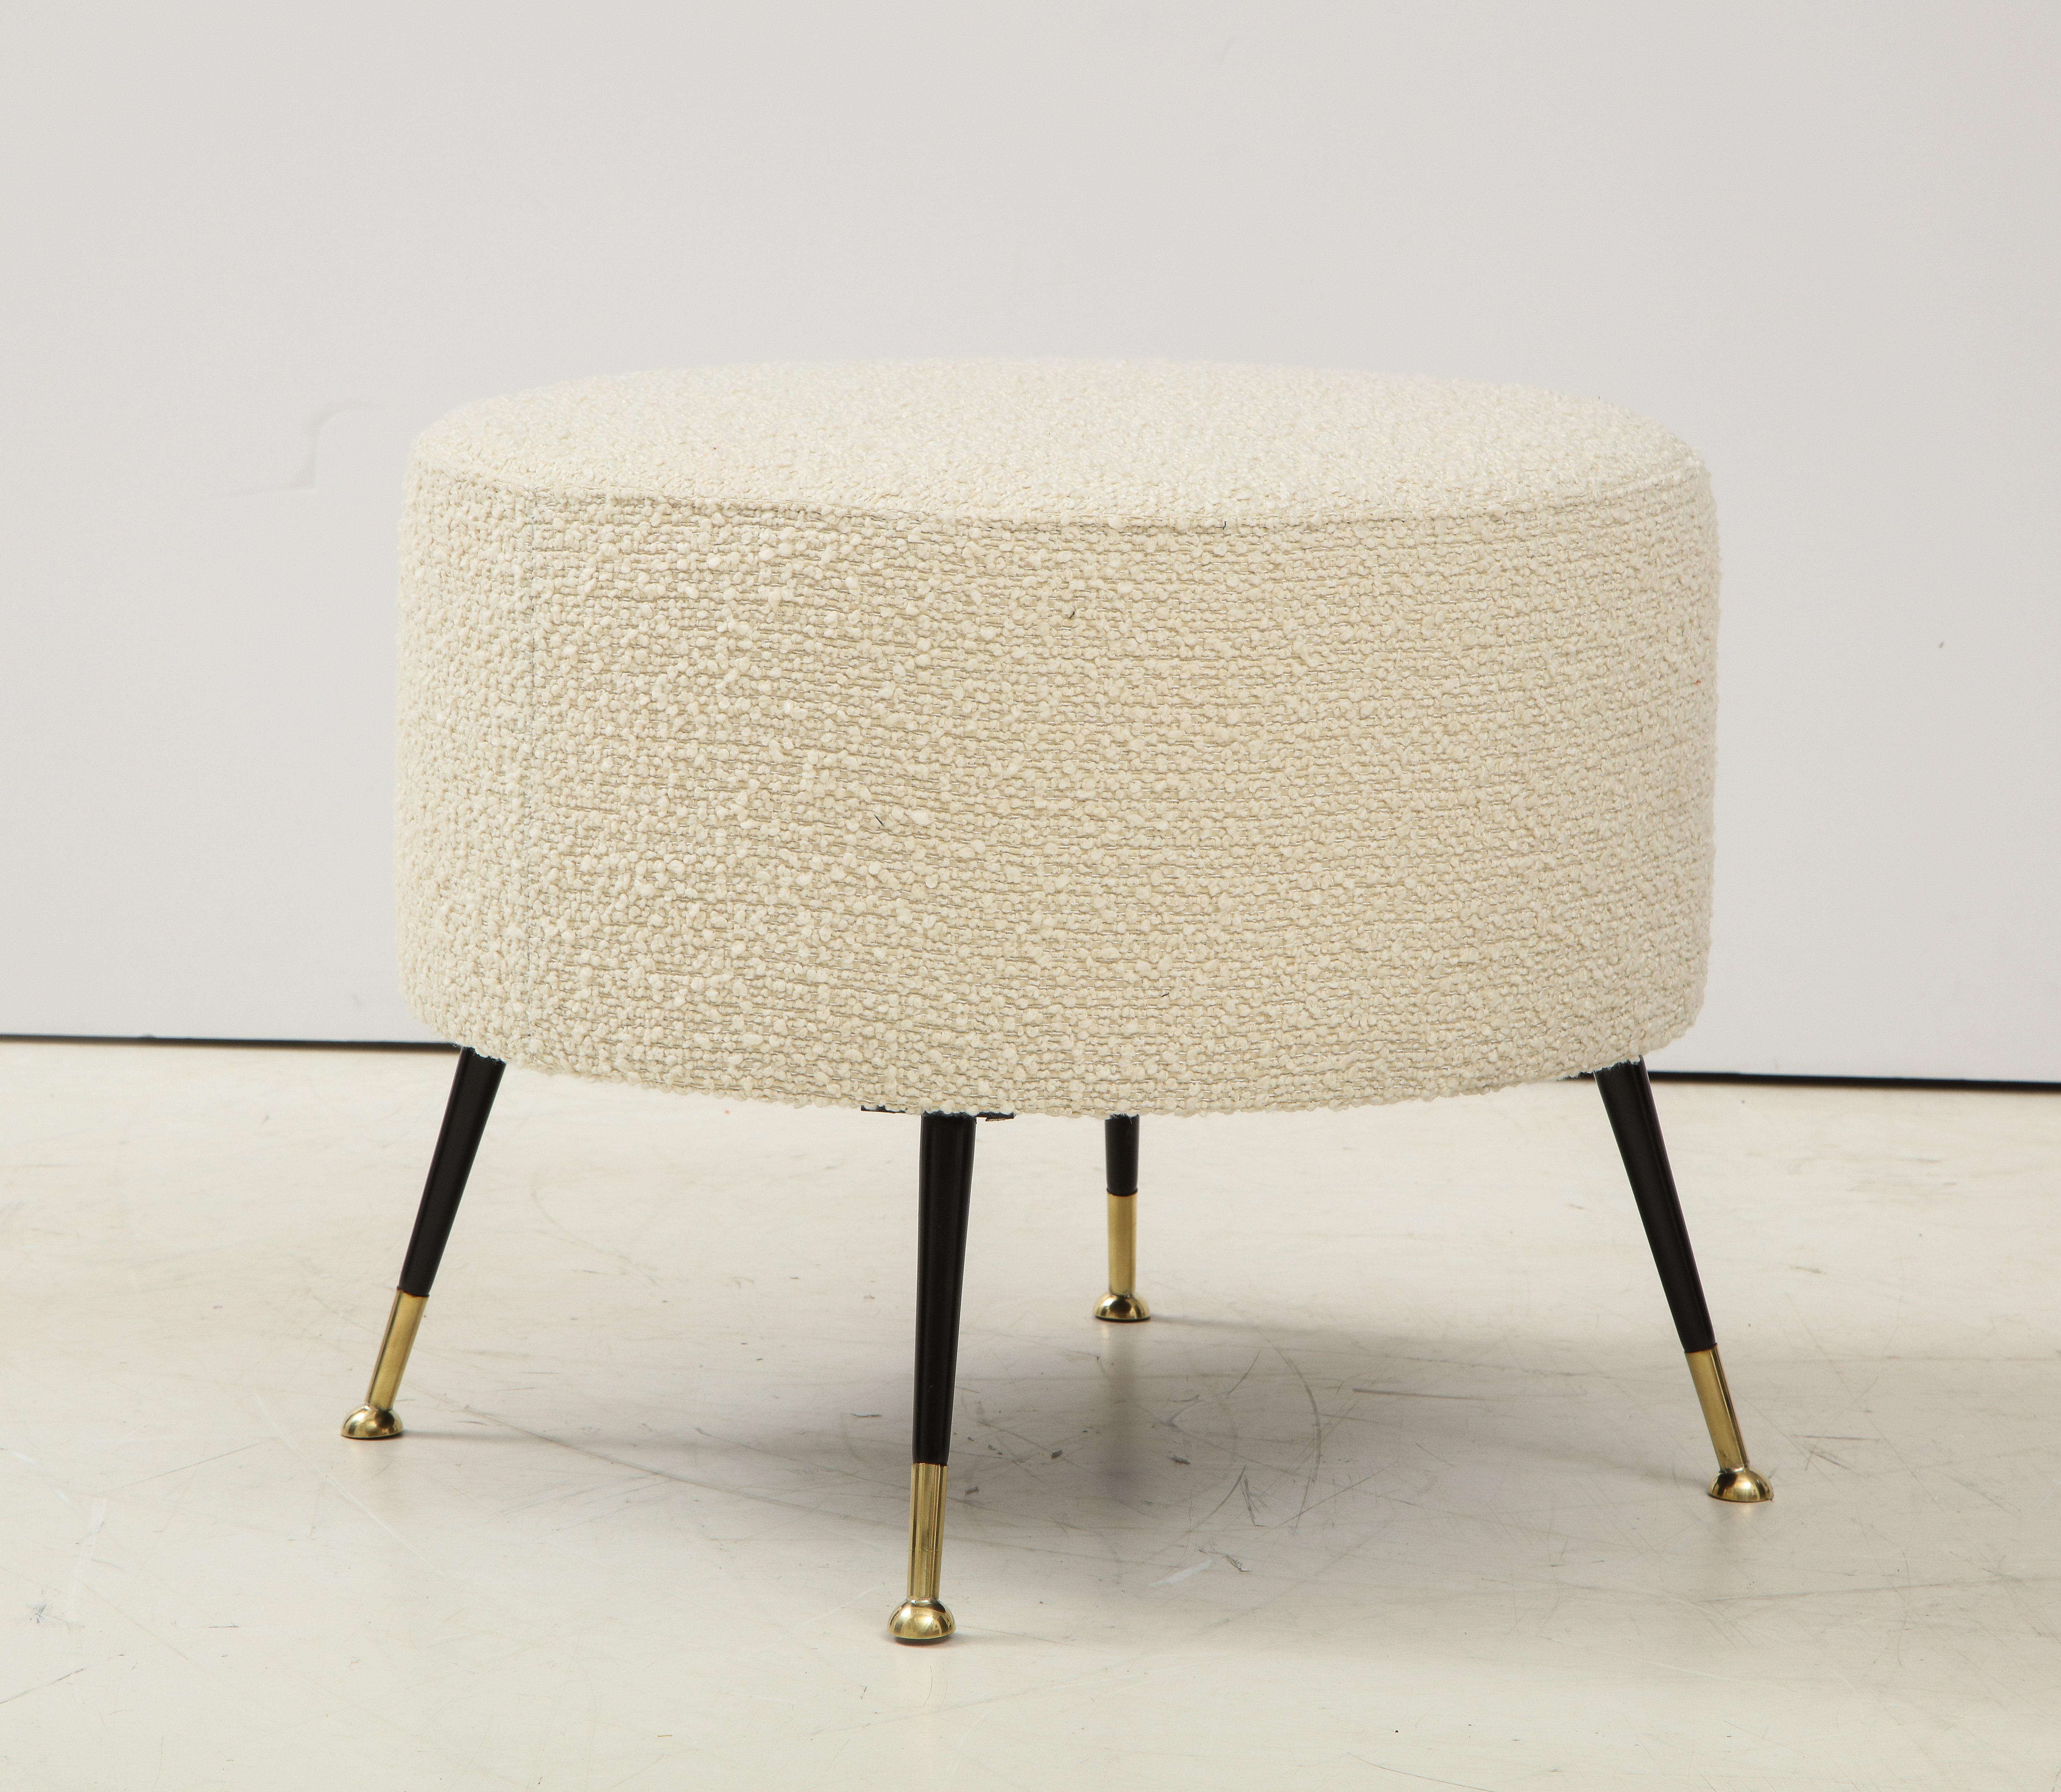 Contemporary Pair of Round Stools or Poufs in Ivory Boucle Brass Legs, Italy, 2021